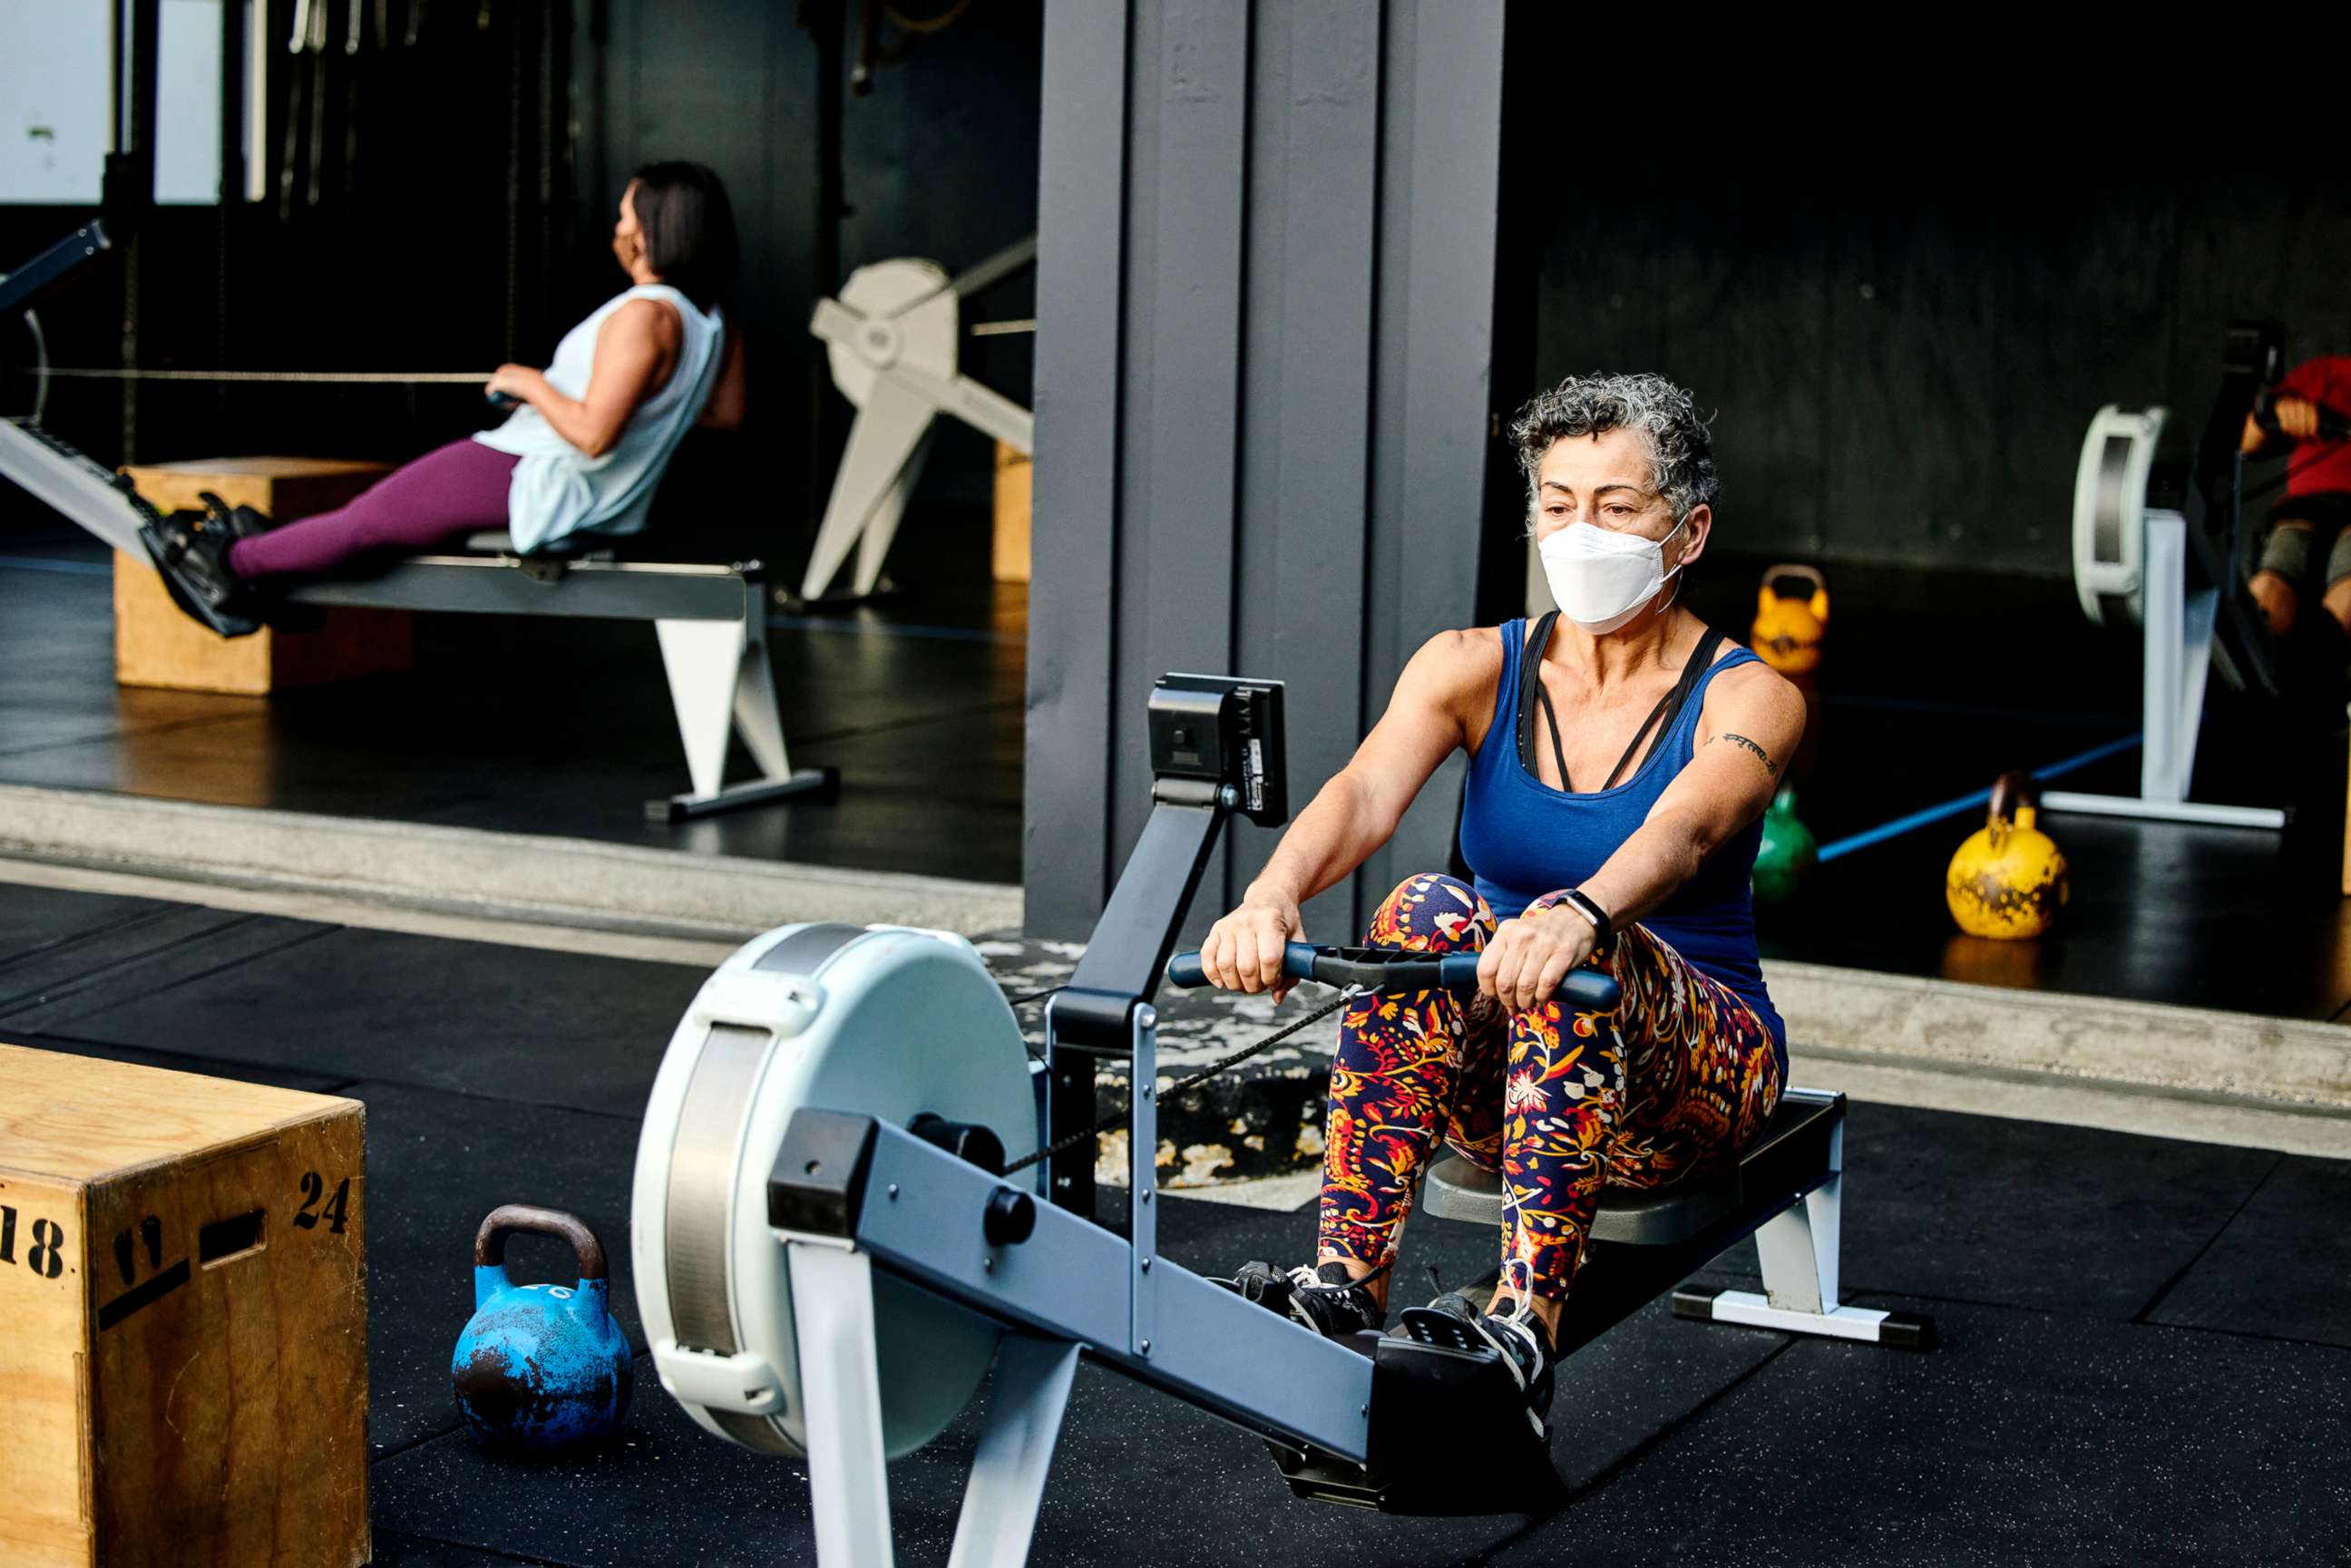 PHOTO: In this undated file photo, a woman works out on a rowing machine at a gym.